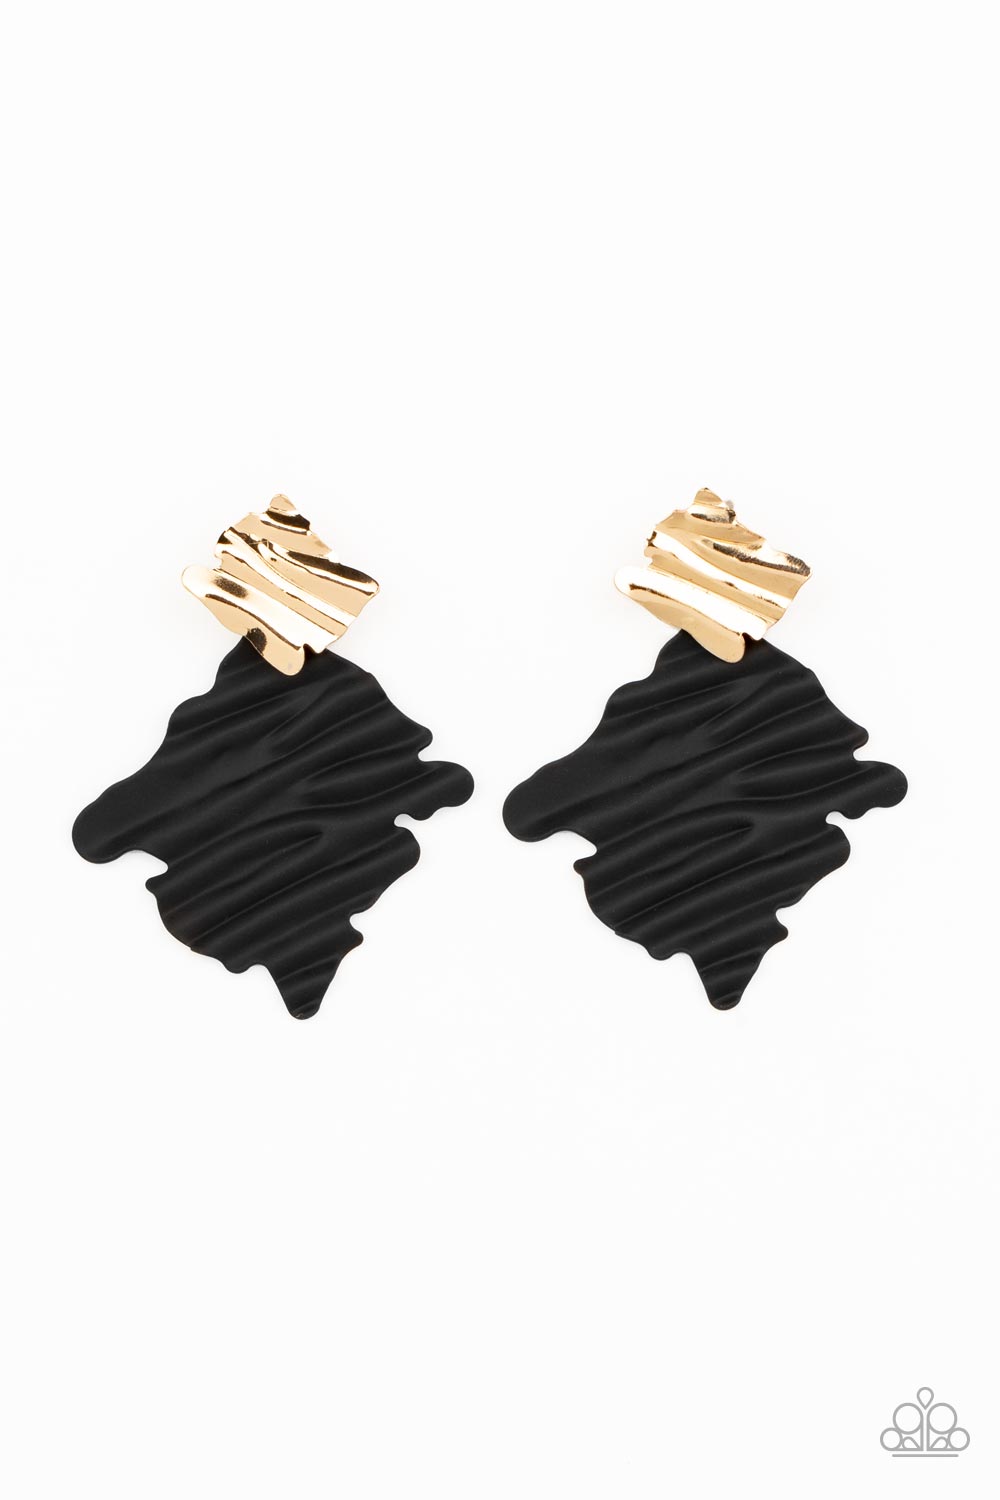 Crimped Couture - Gold & Black Earrings - Princess Glam Shop